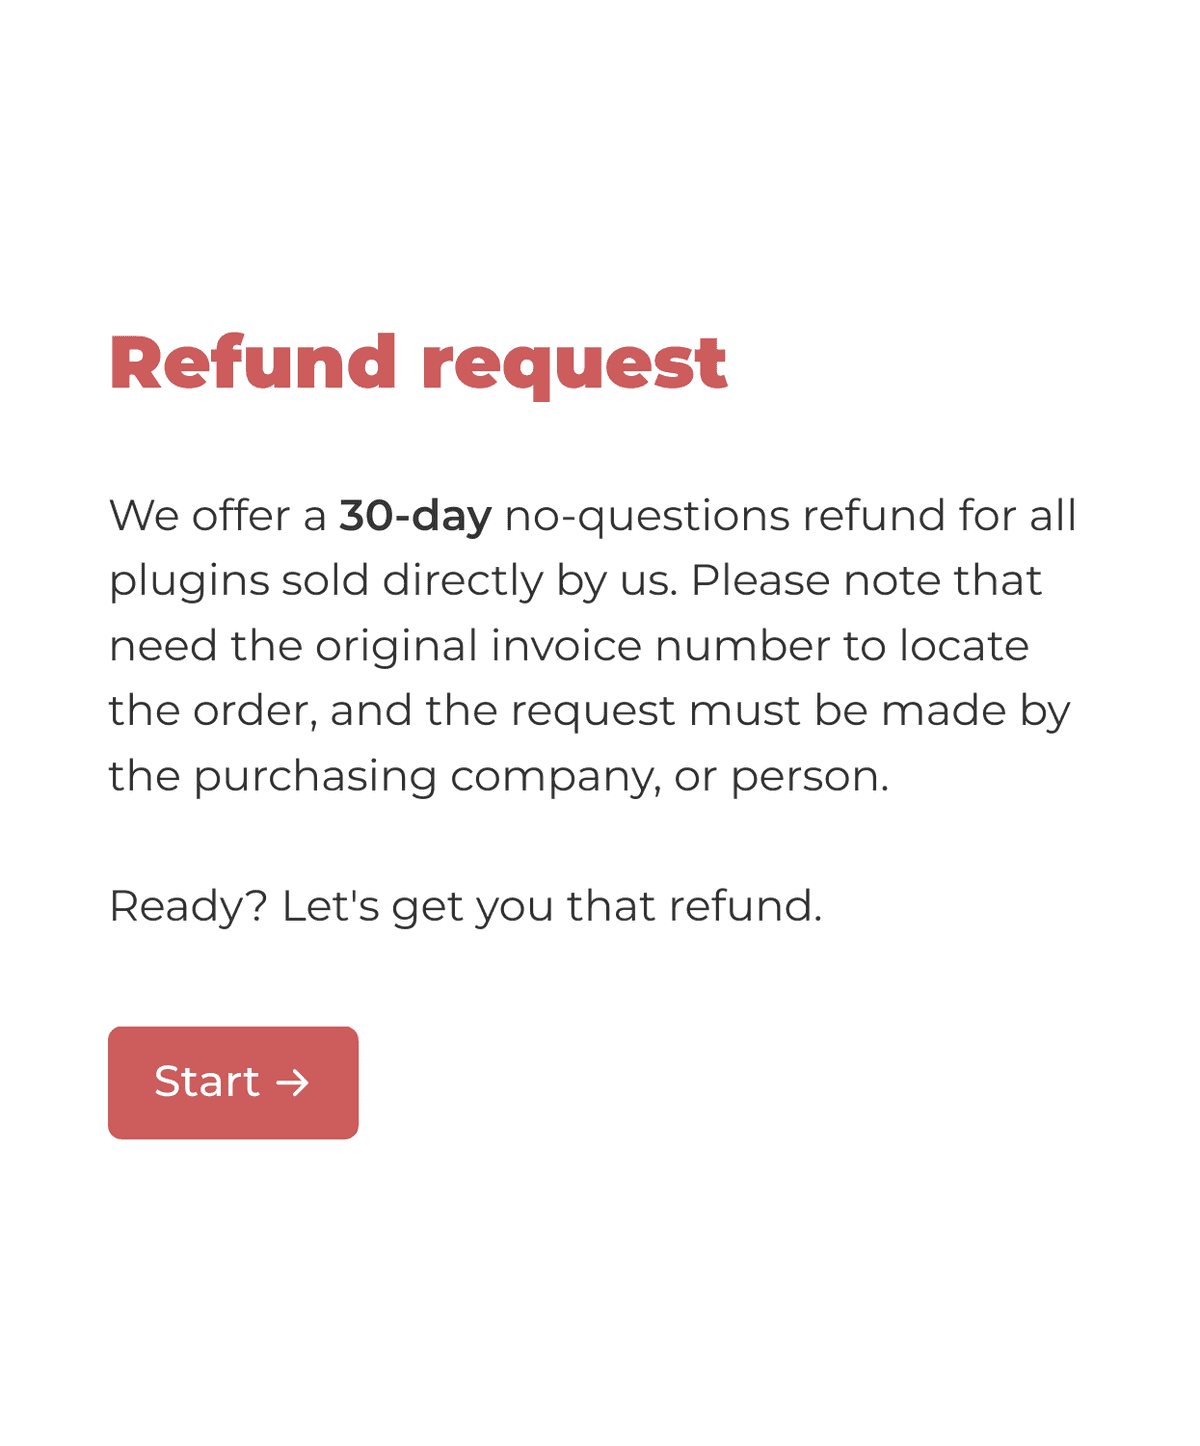 Welcome page of a refund request form stating refund terms with a 'Start' button